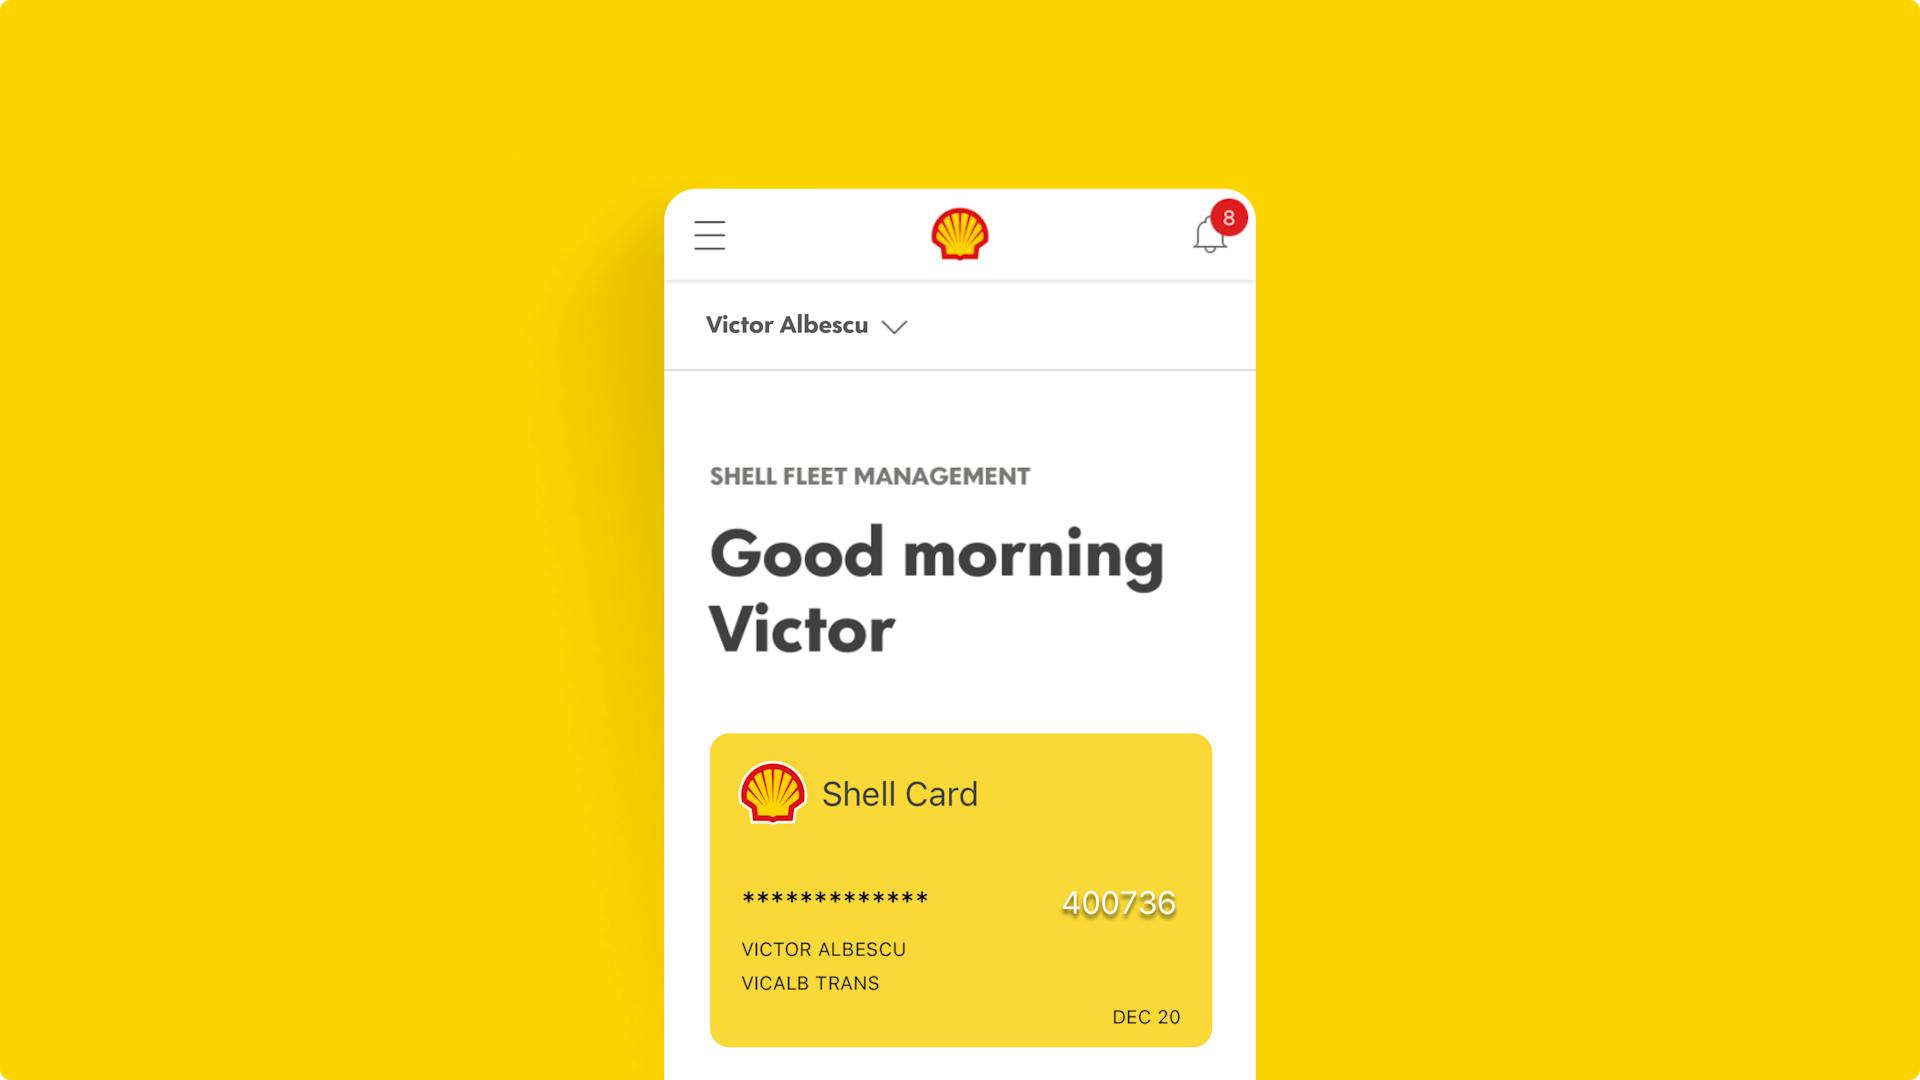 The Shell Fleet Hub welcome screen, with a good morning message and an example of a Shell Card below.